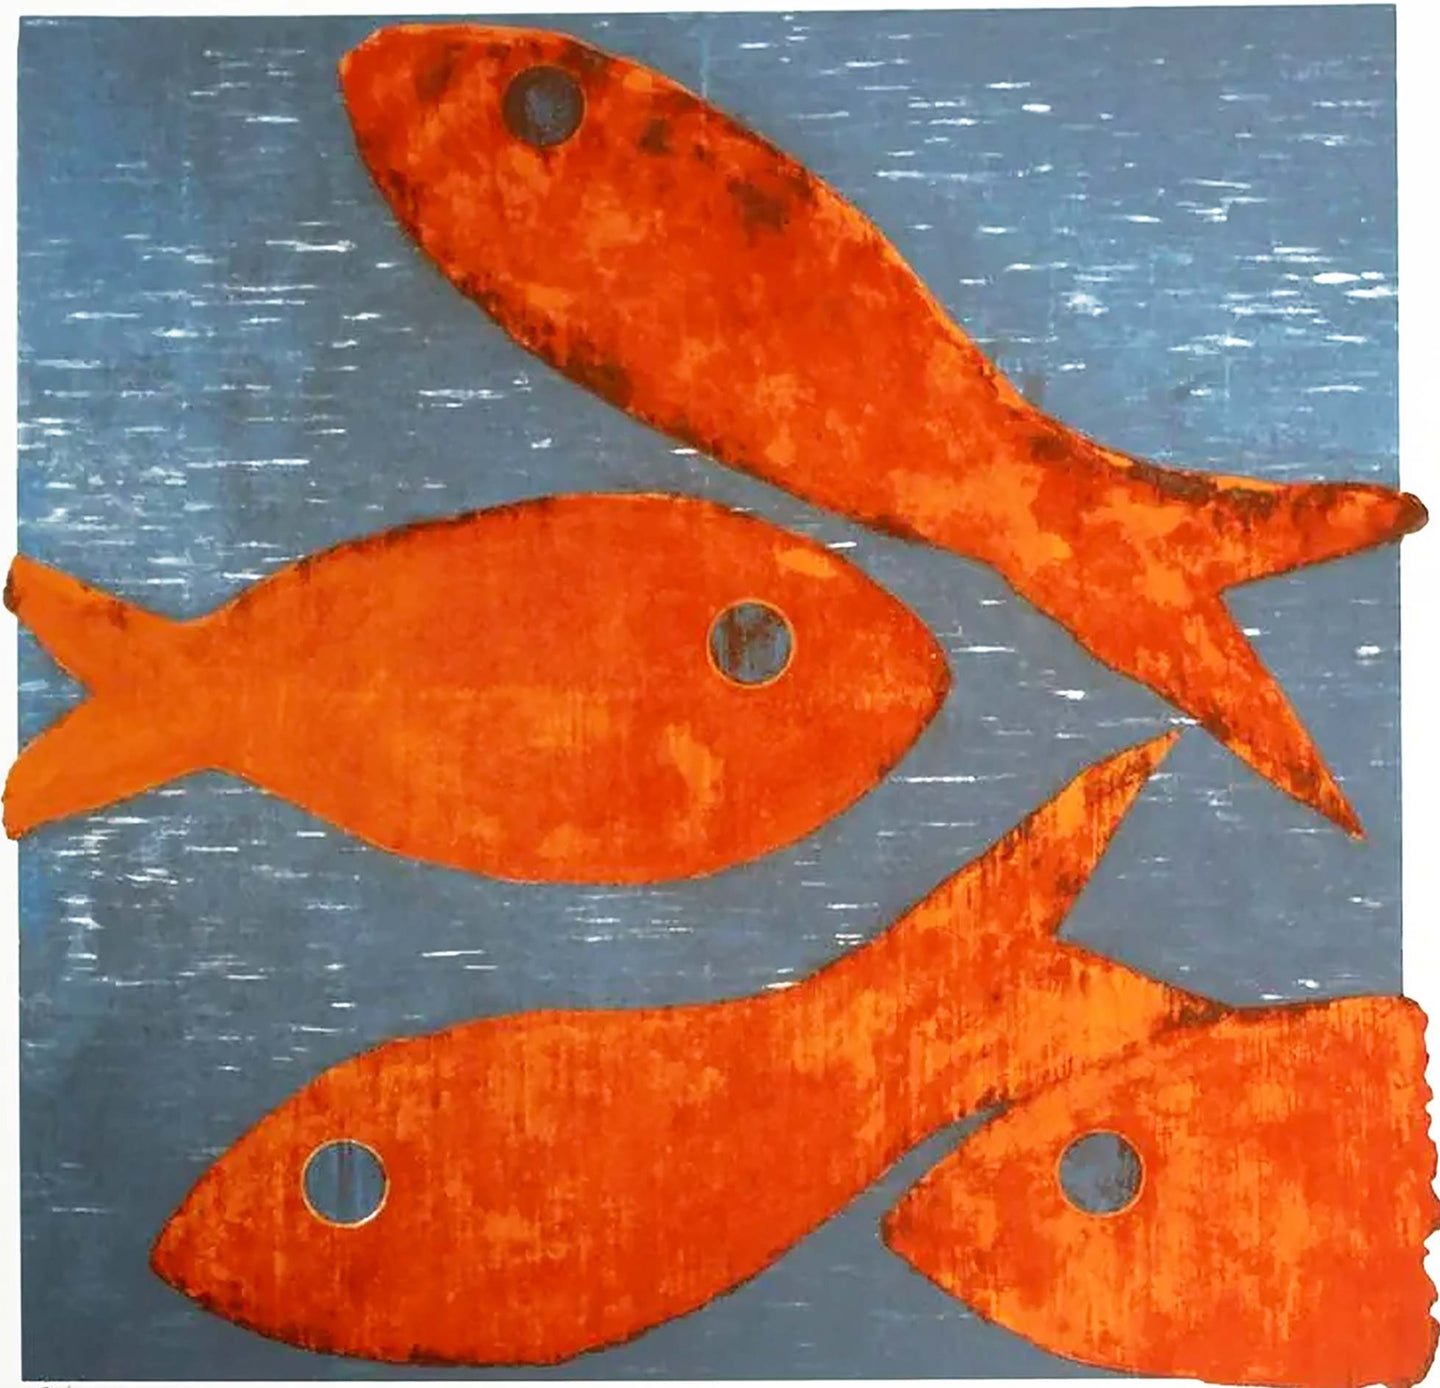 Donald Sultan, Untitled (Goldfish)From Visual Poetics, 1998, Serigraph on paper, 22 x 17 inches, edition 175 of 395